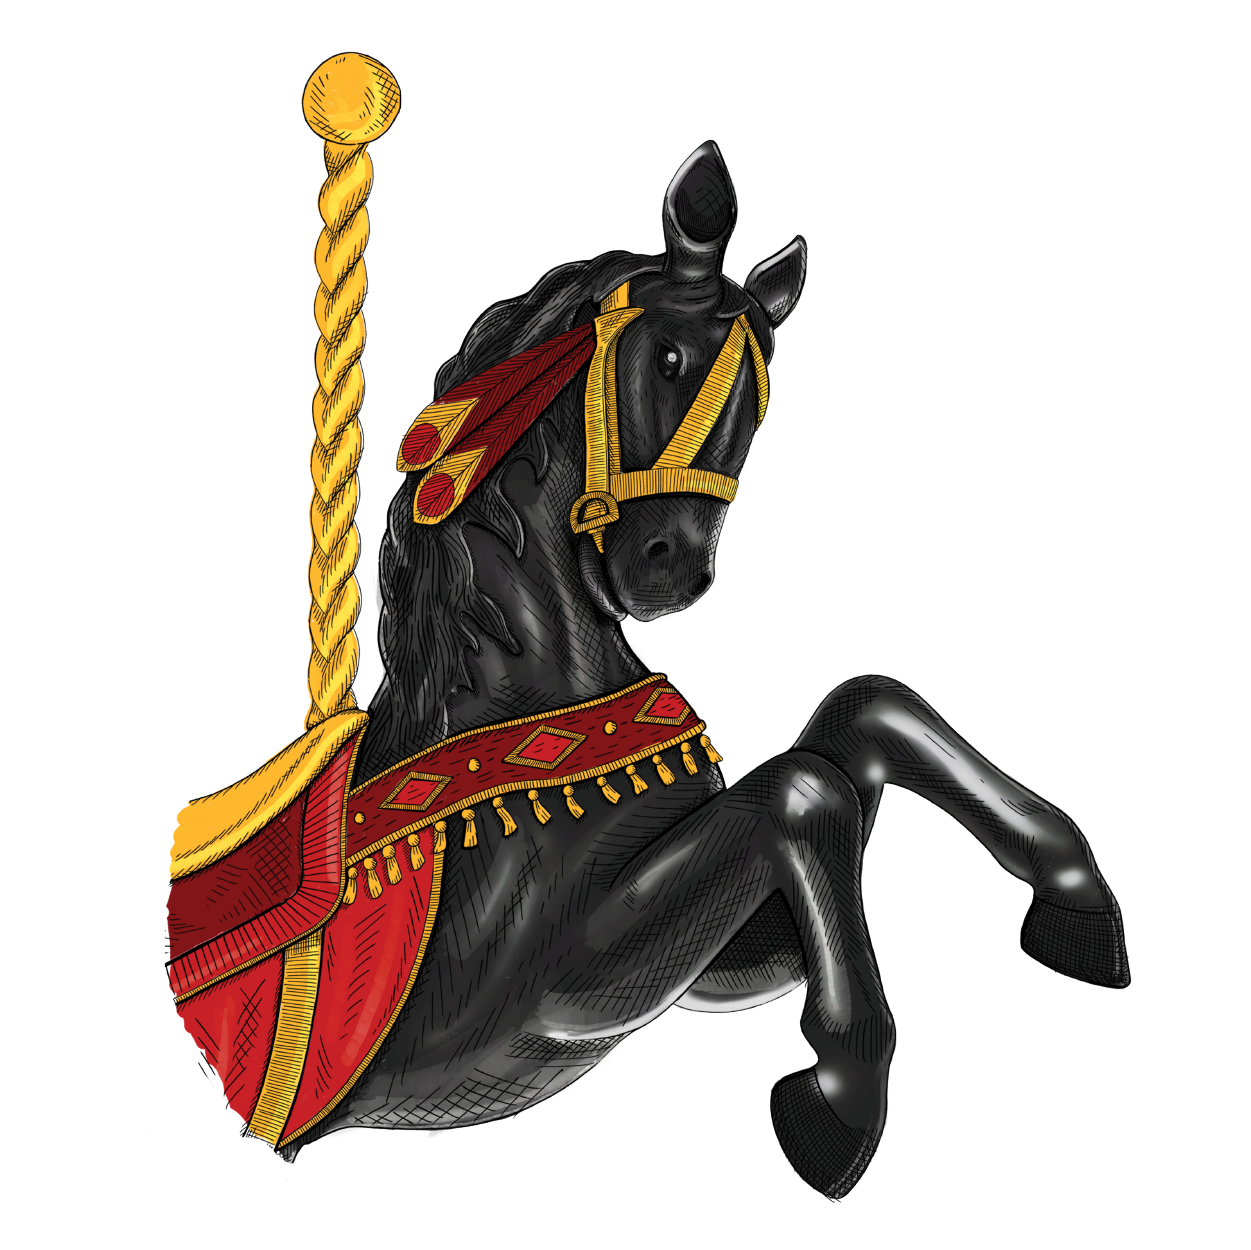 Black carousel horse with red coat